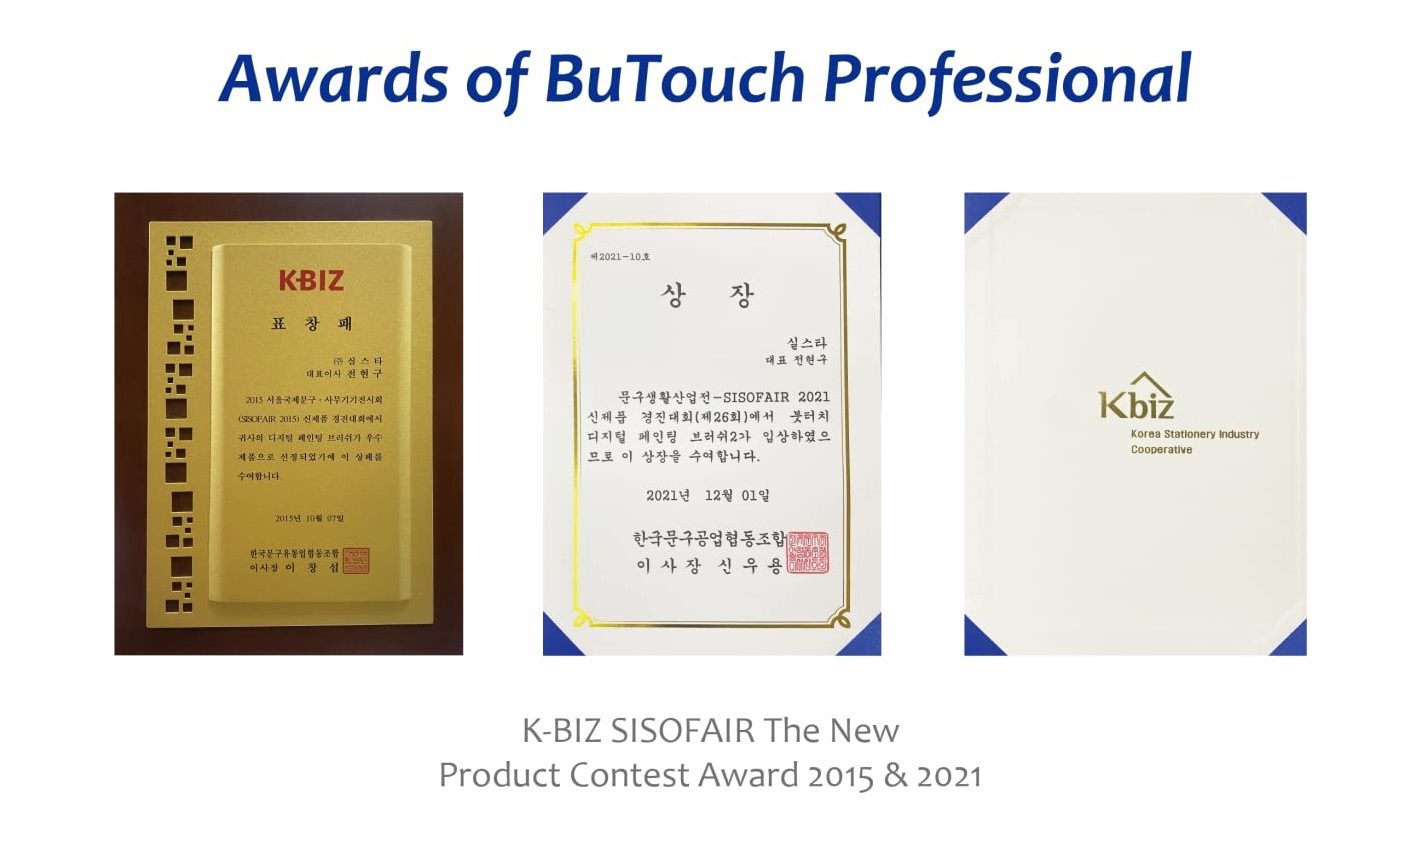 Cọ kỹ thuật số Butouch Professional